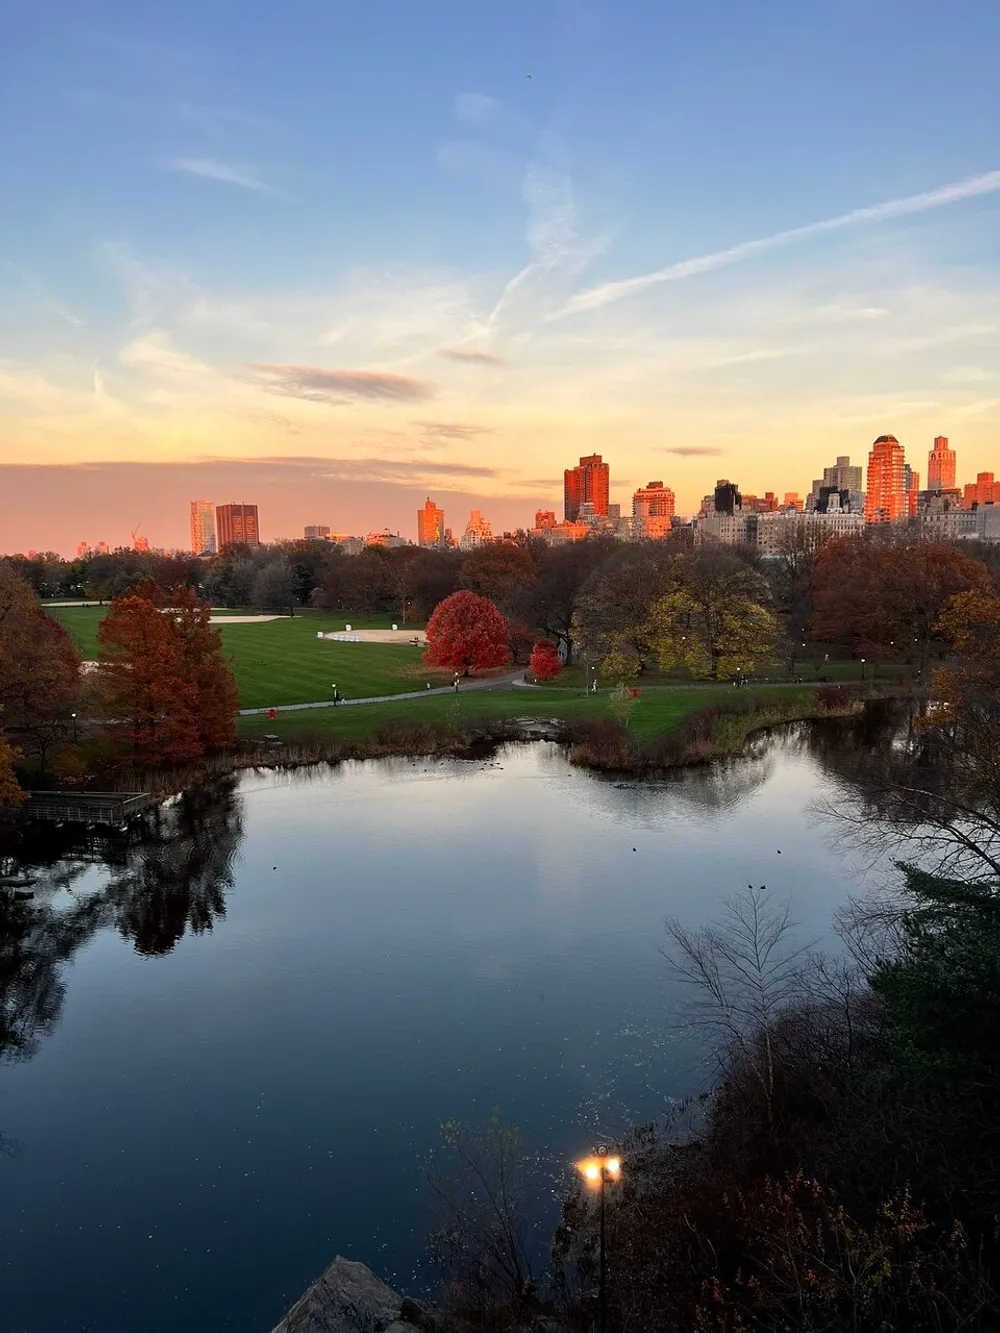 The image captures a serene sunset with a captivating interplay of light and shadow over a park with a pond surrounded by autumn-colored trees and urban high-rises in the background